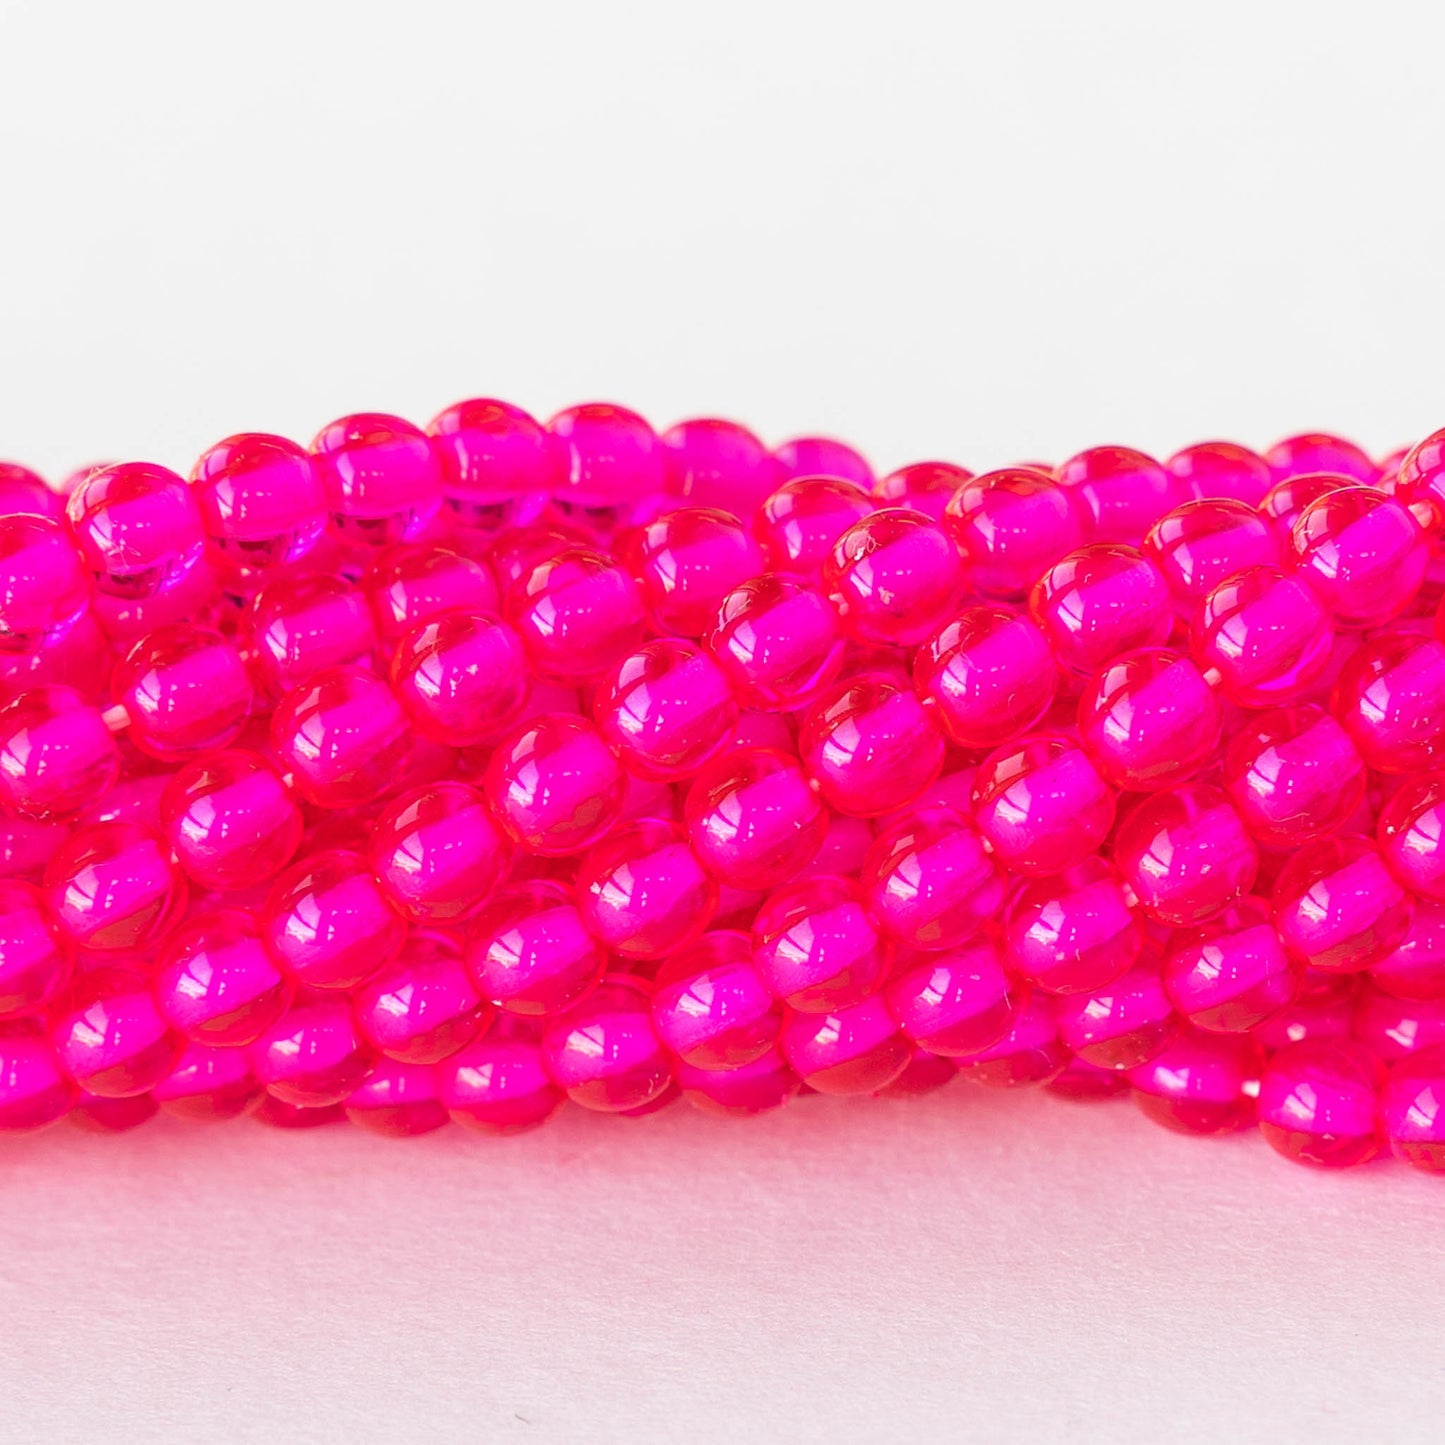 Neon Pink Frosted Glass Beads, 6mm Smooth Round - Golden Age Beads